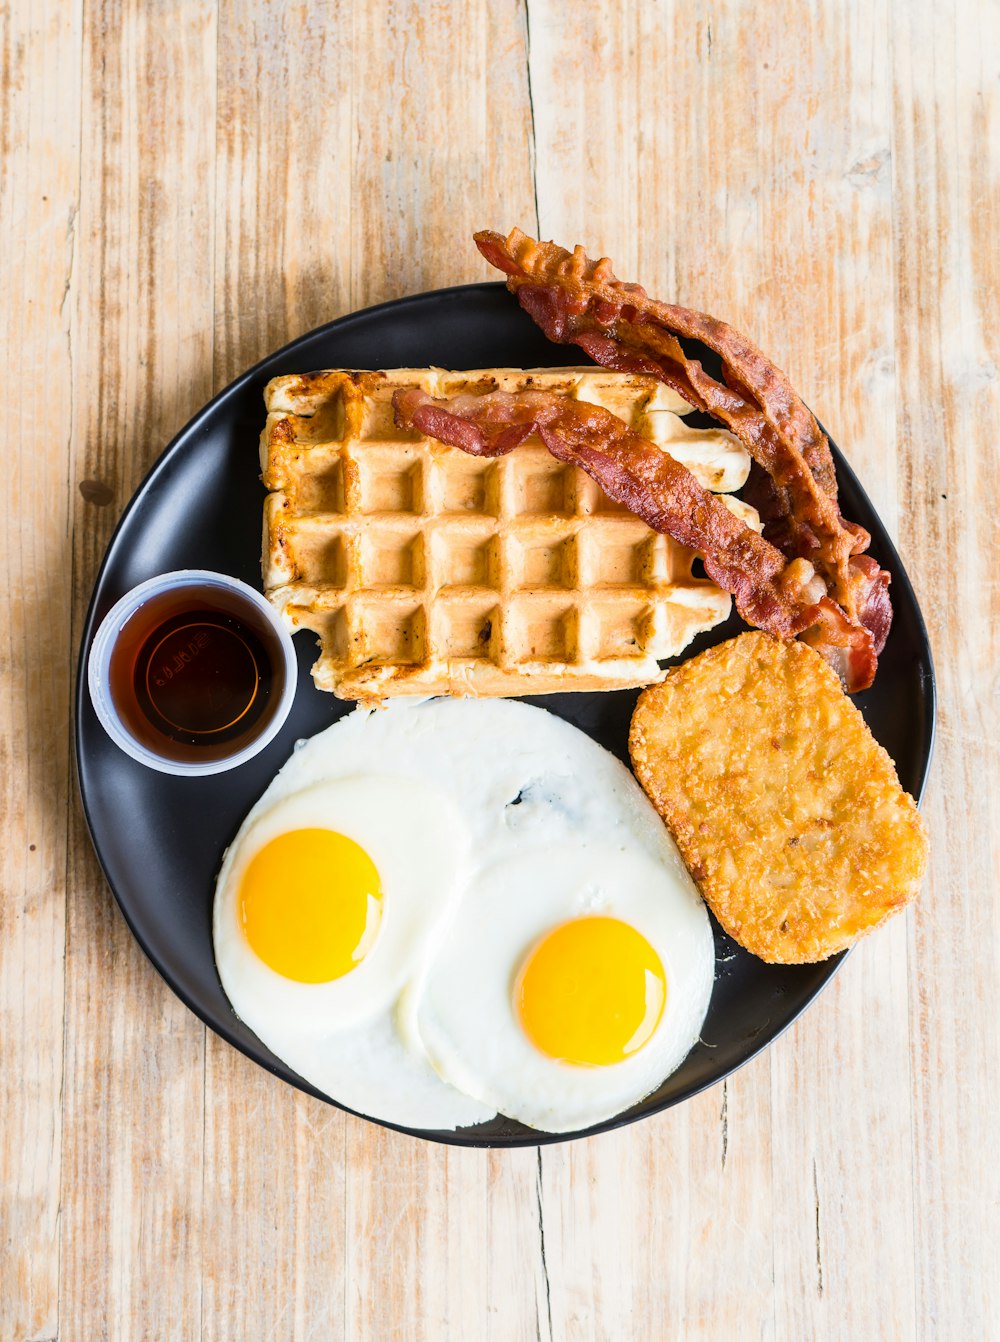 a breakfast plate with eggs, waffles, and bacon